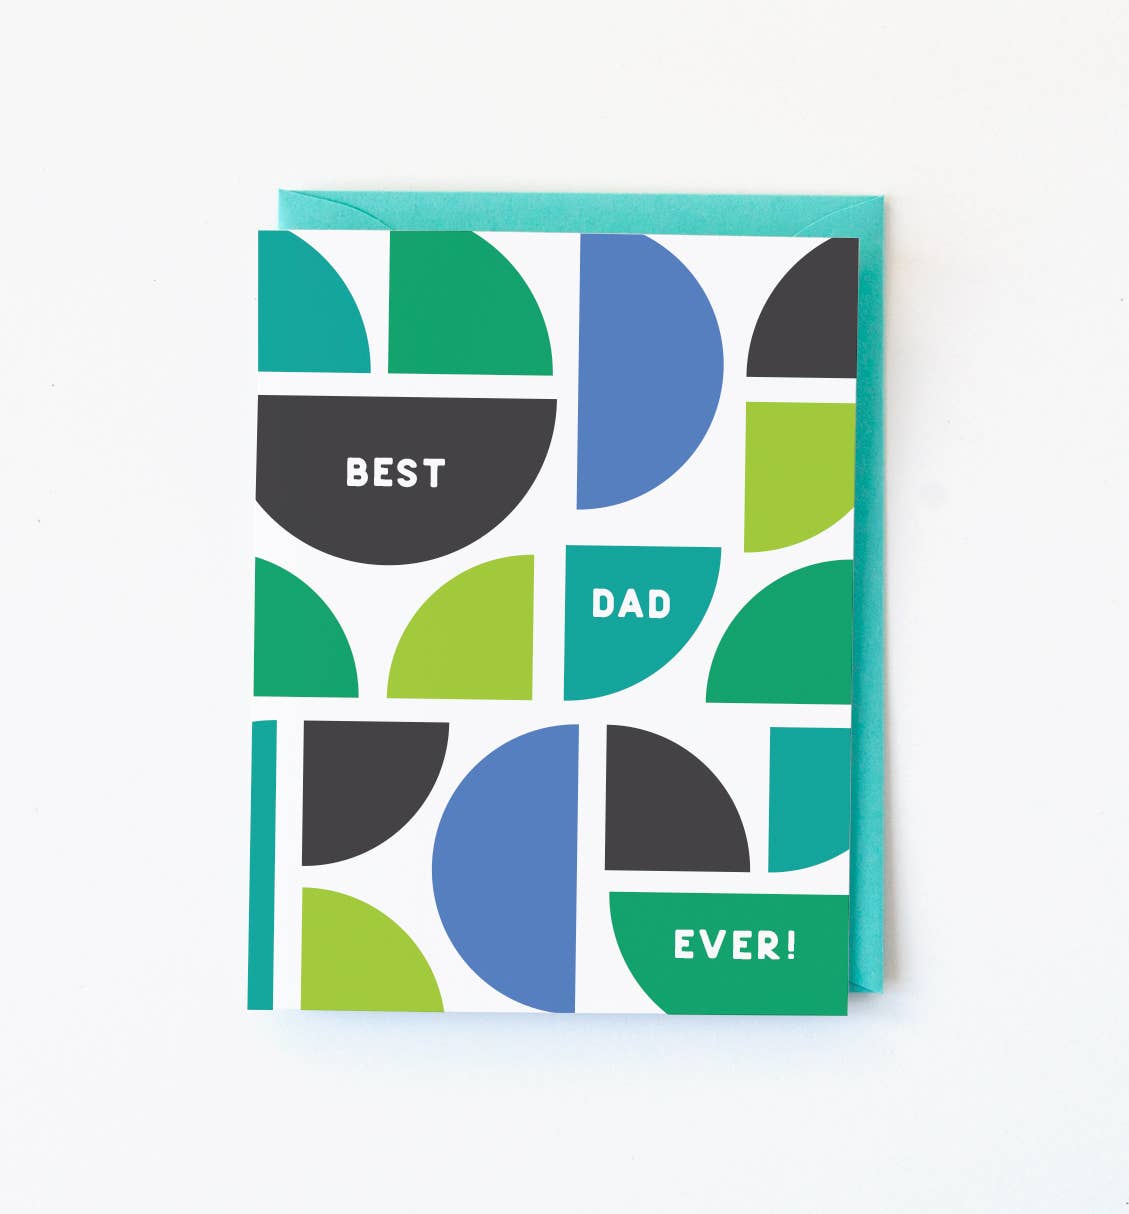 Best Dad Ever Father's Day card